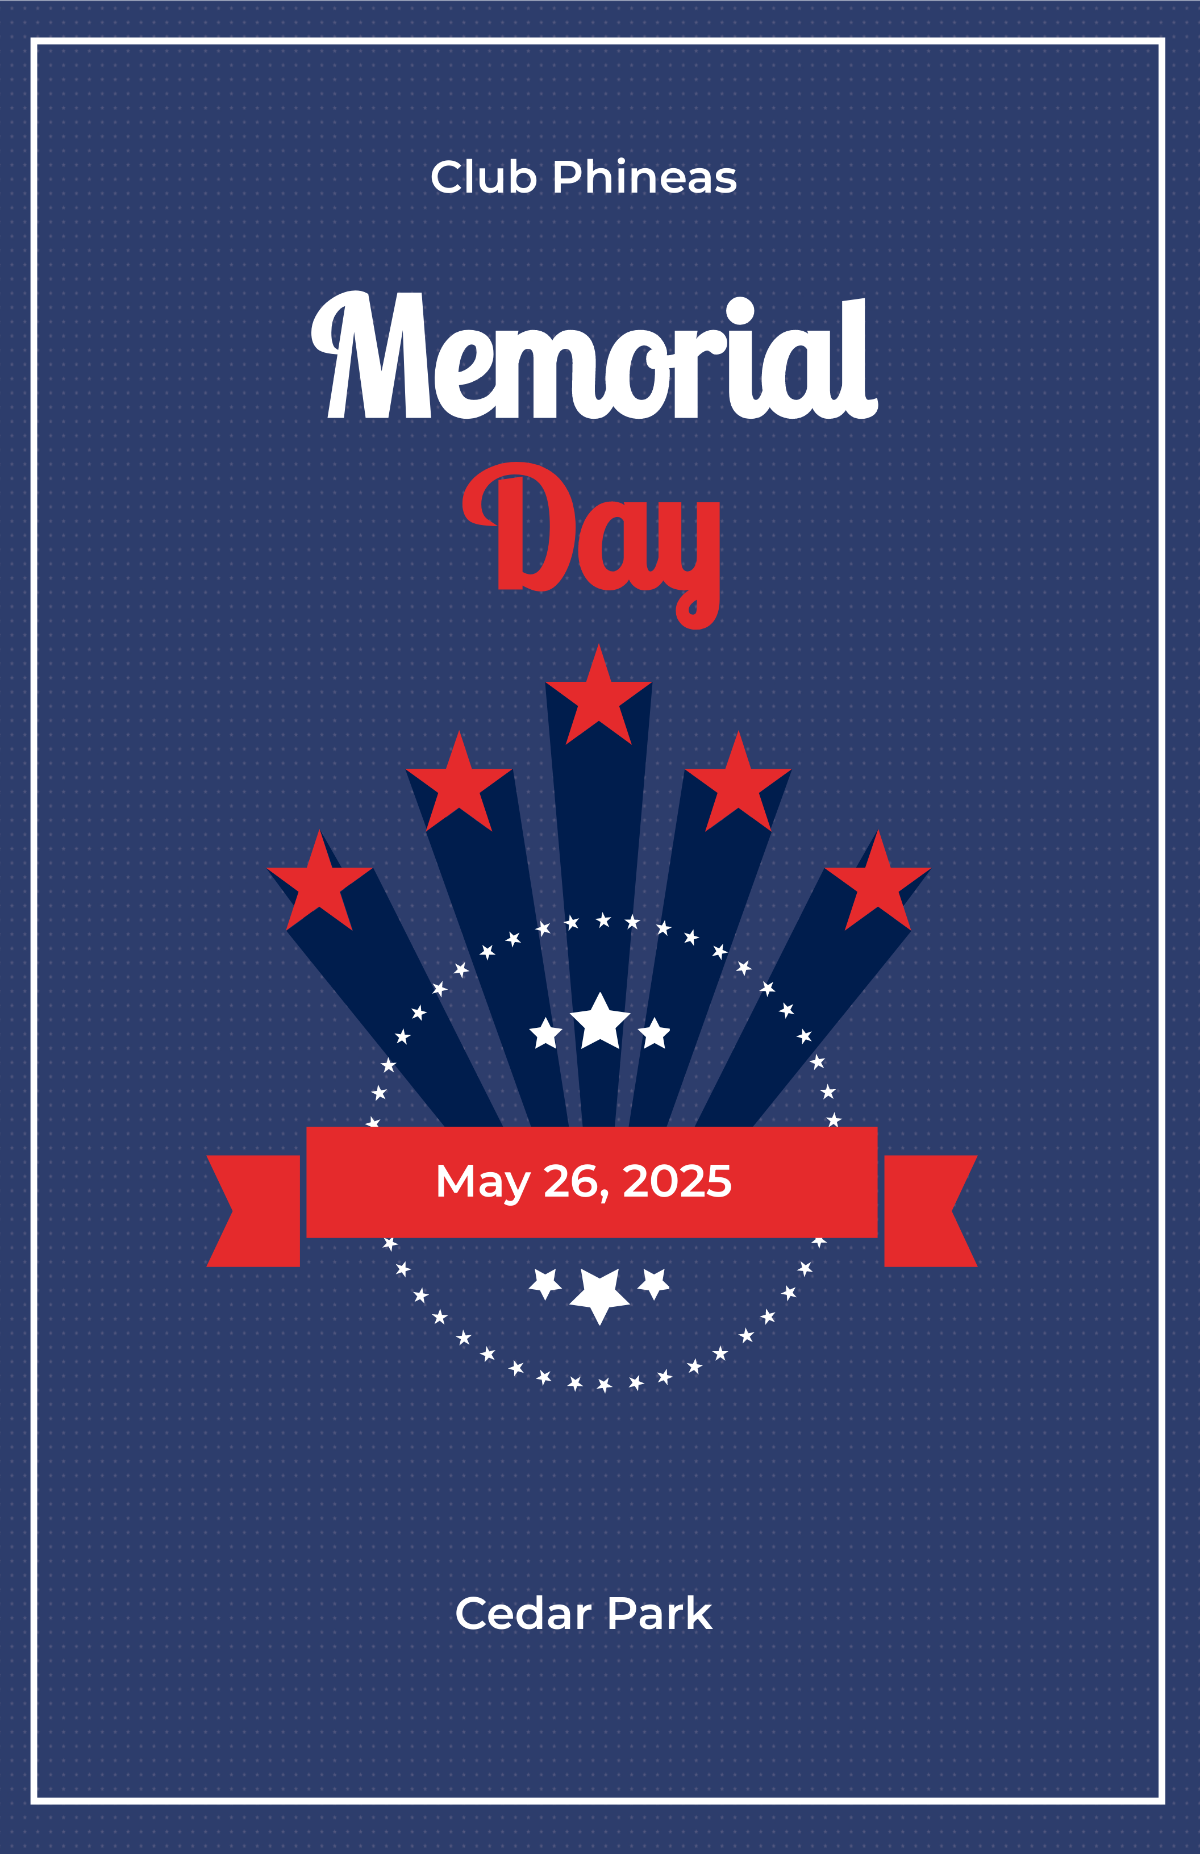 Memorial Day Event Poster Template